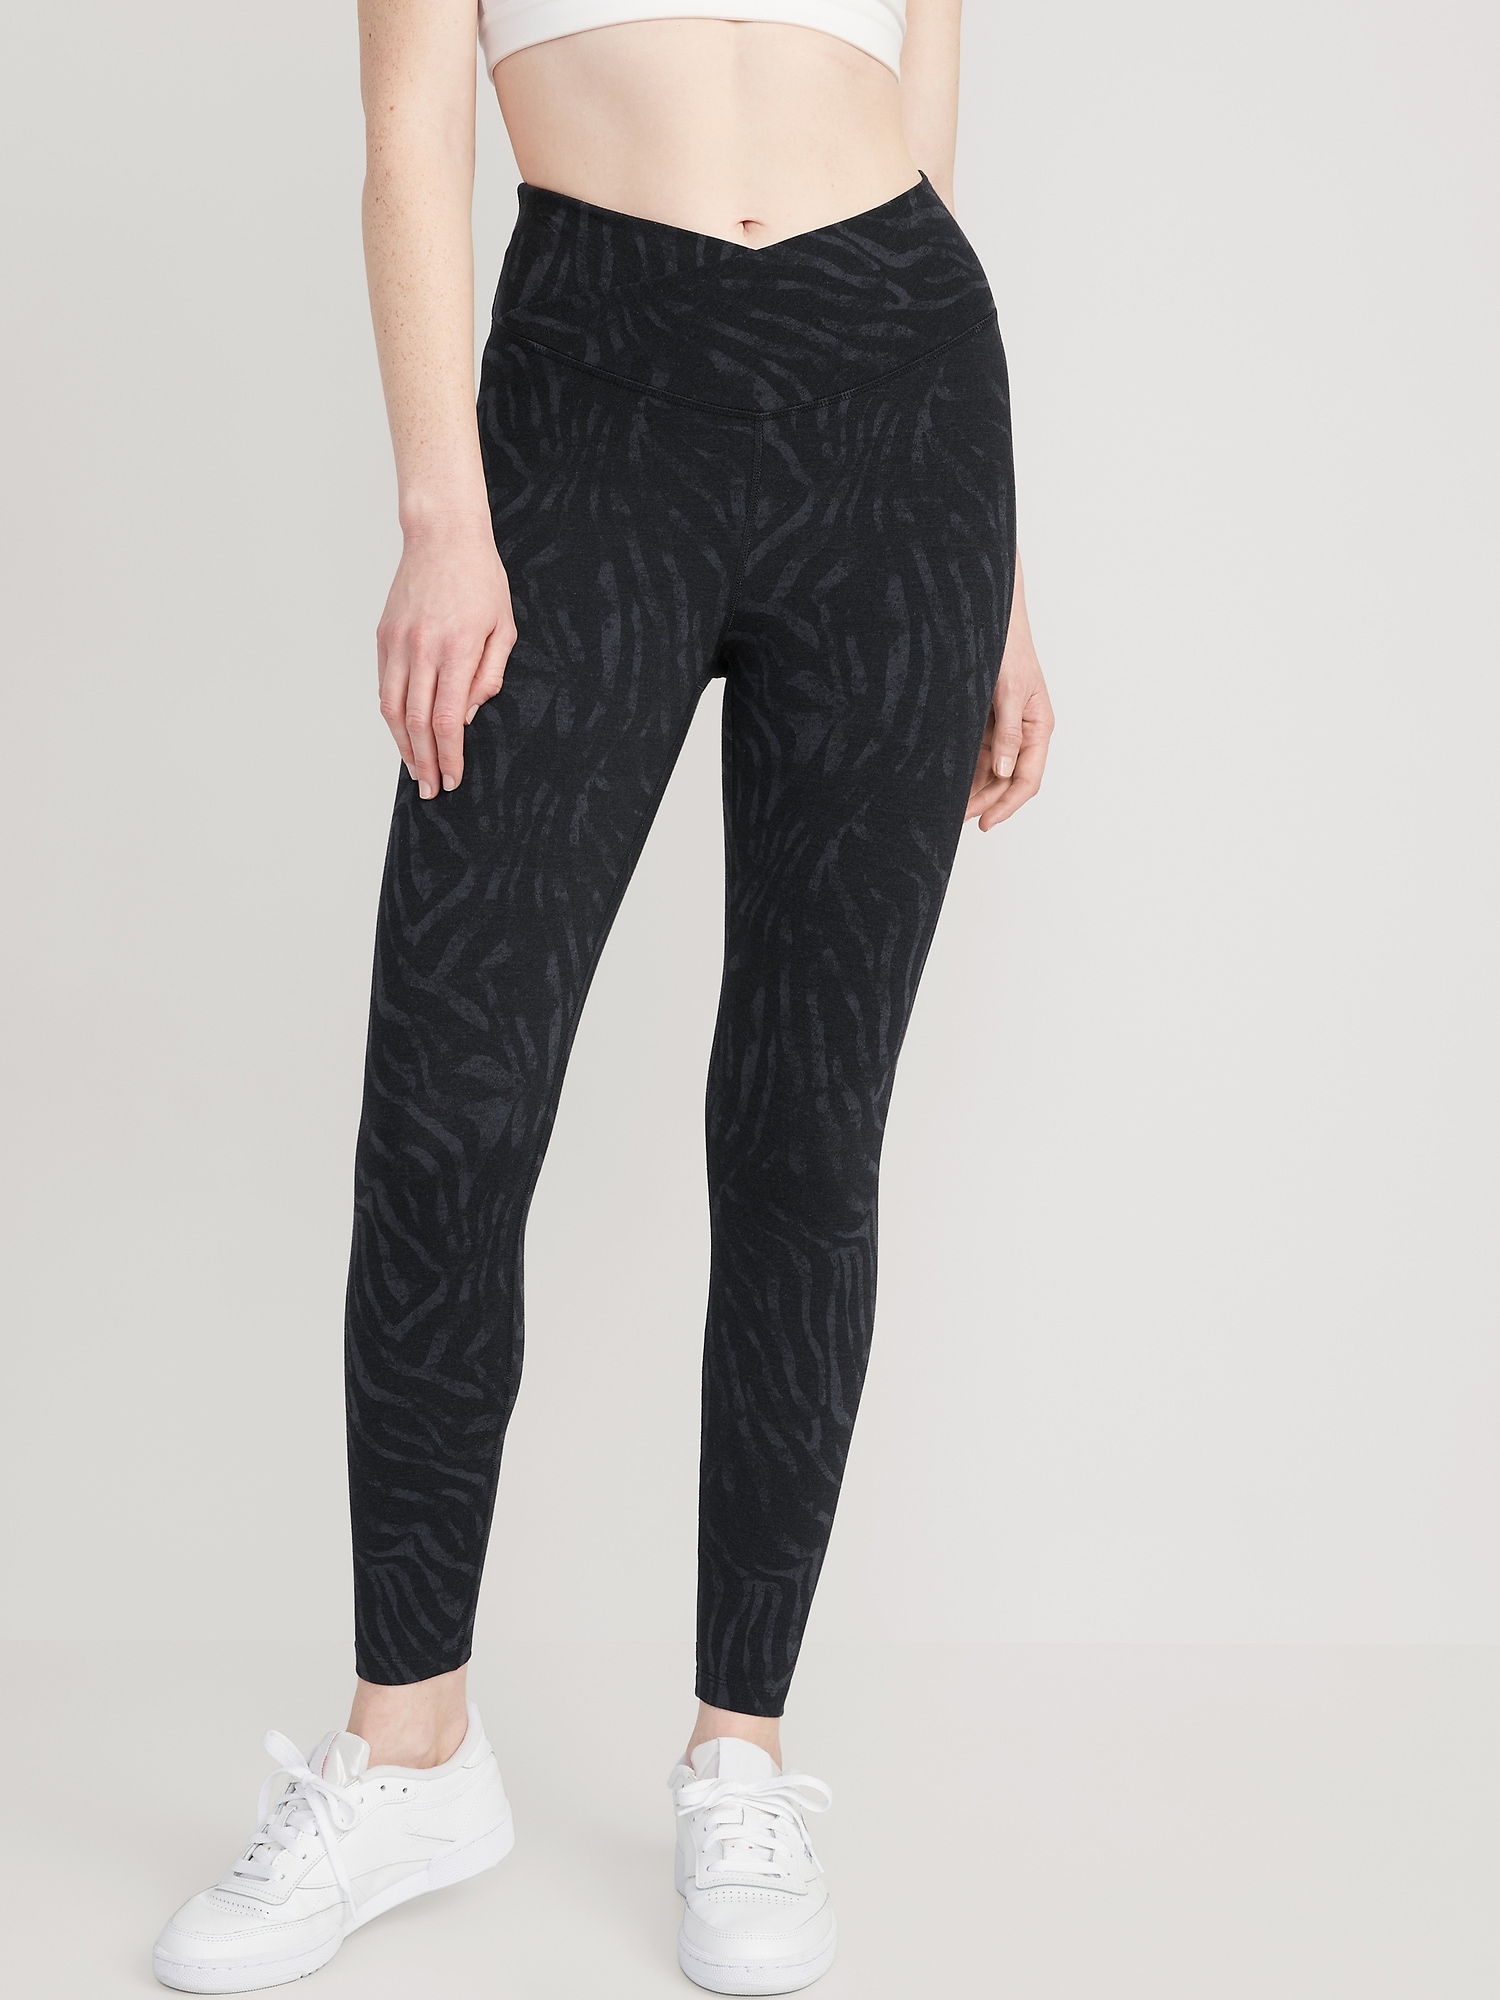 Extra High-Waisted PowerChill 7/8 Leggings, Old Navy